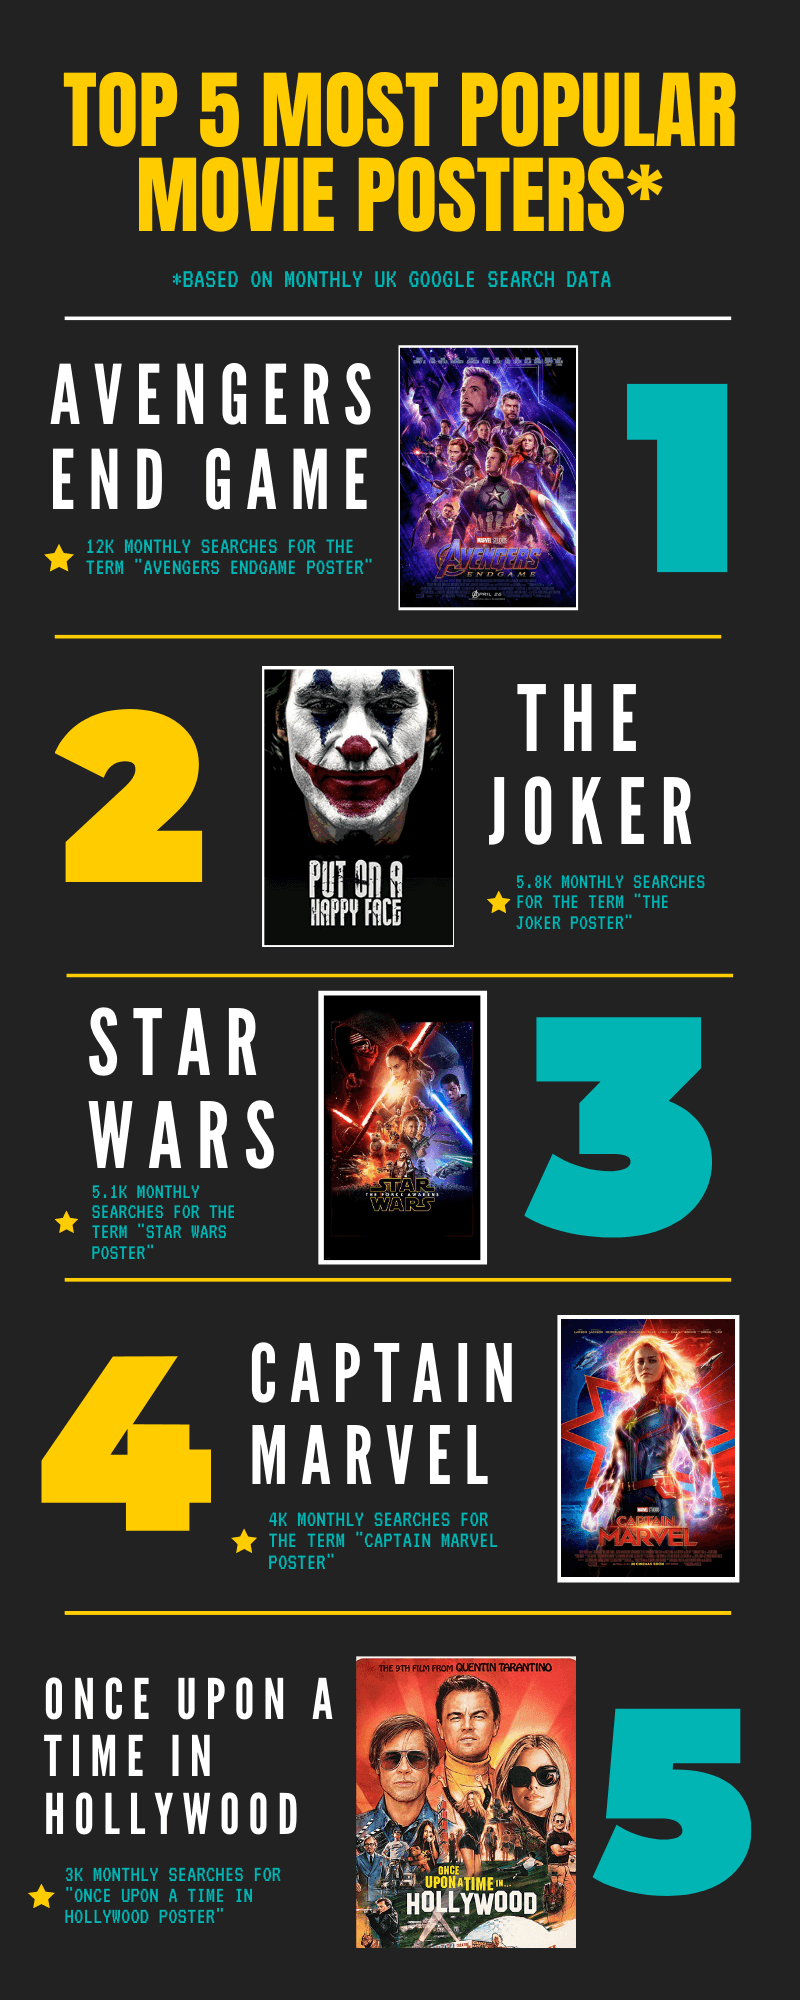 Most popular movie posters in the UK